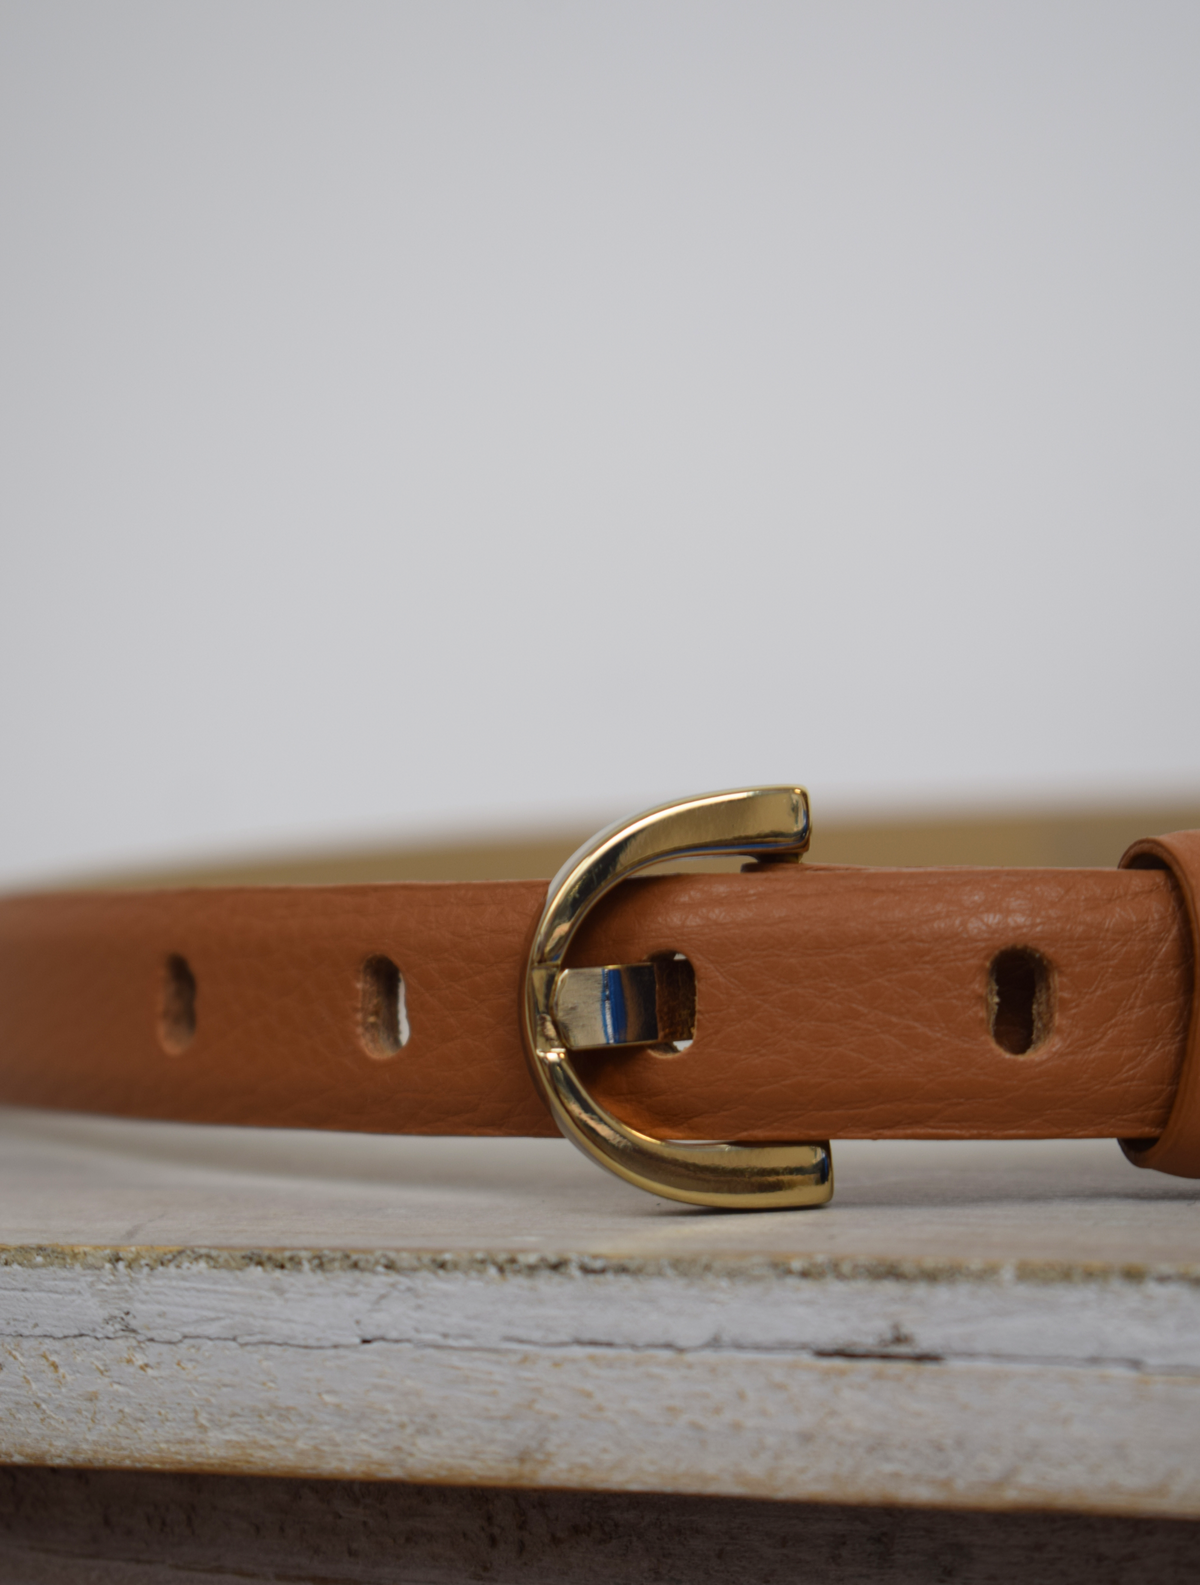 Thin tan belt with gold metallic D shaped buckle